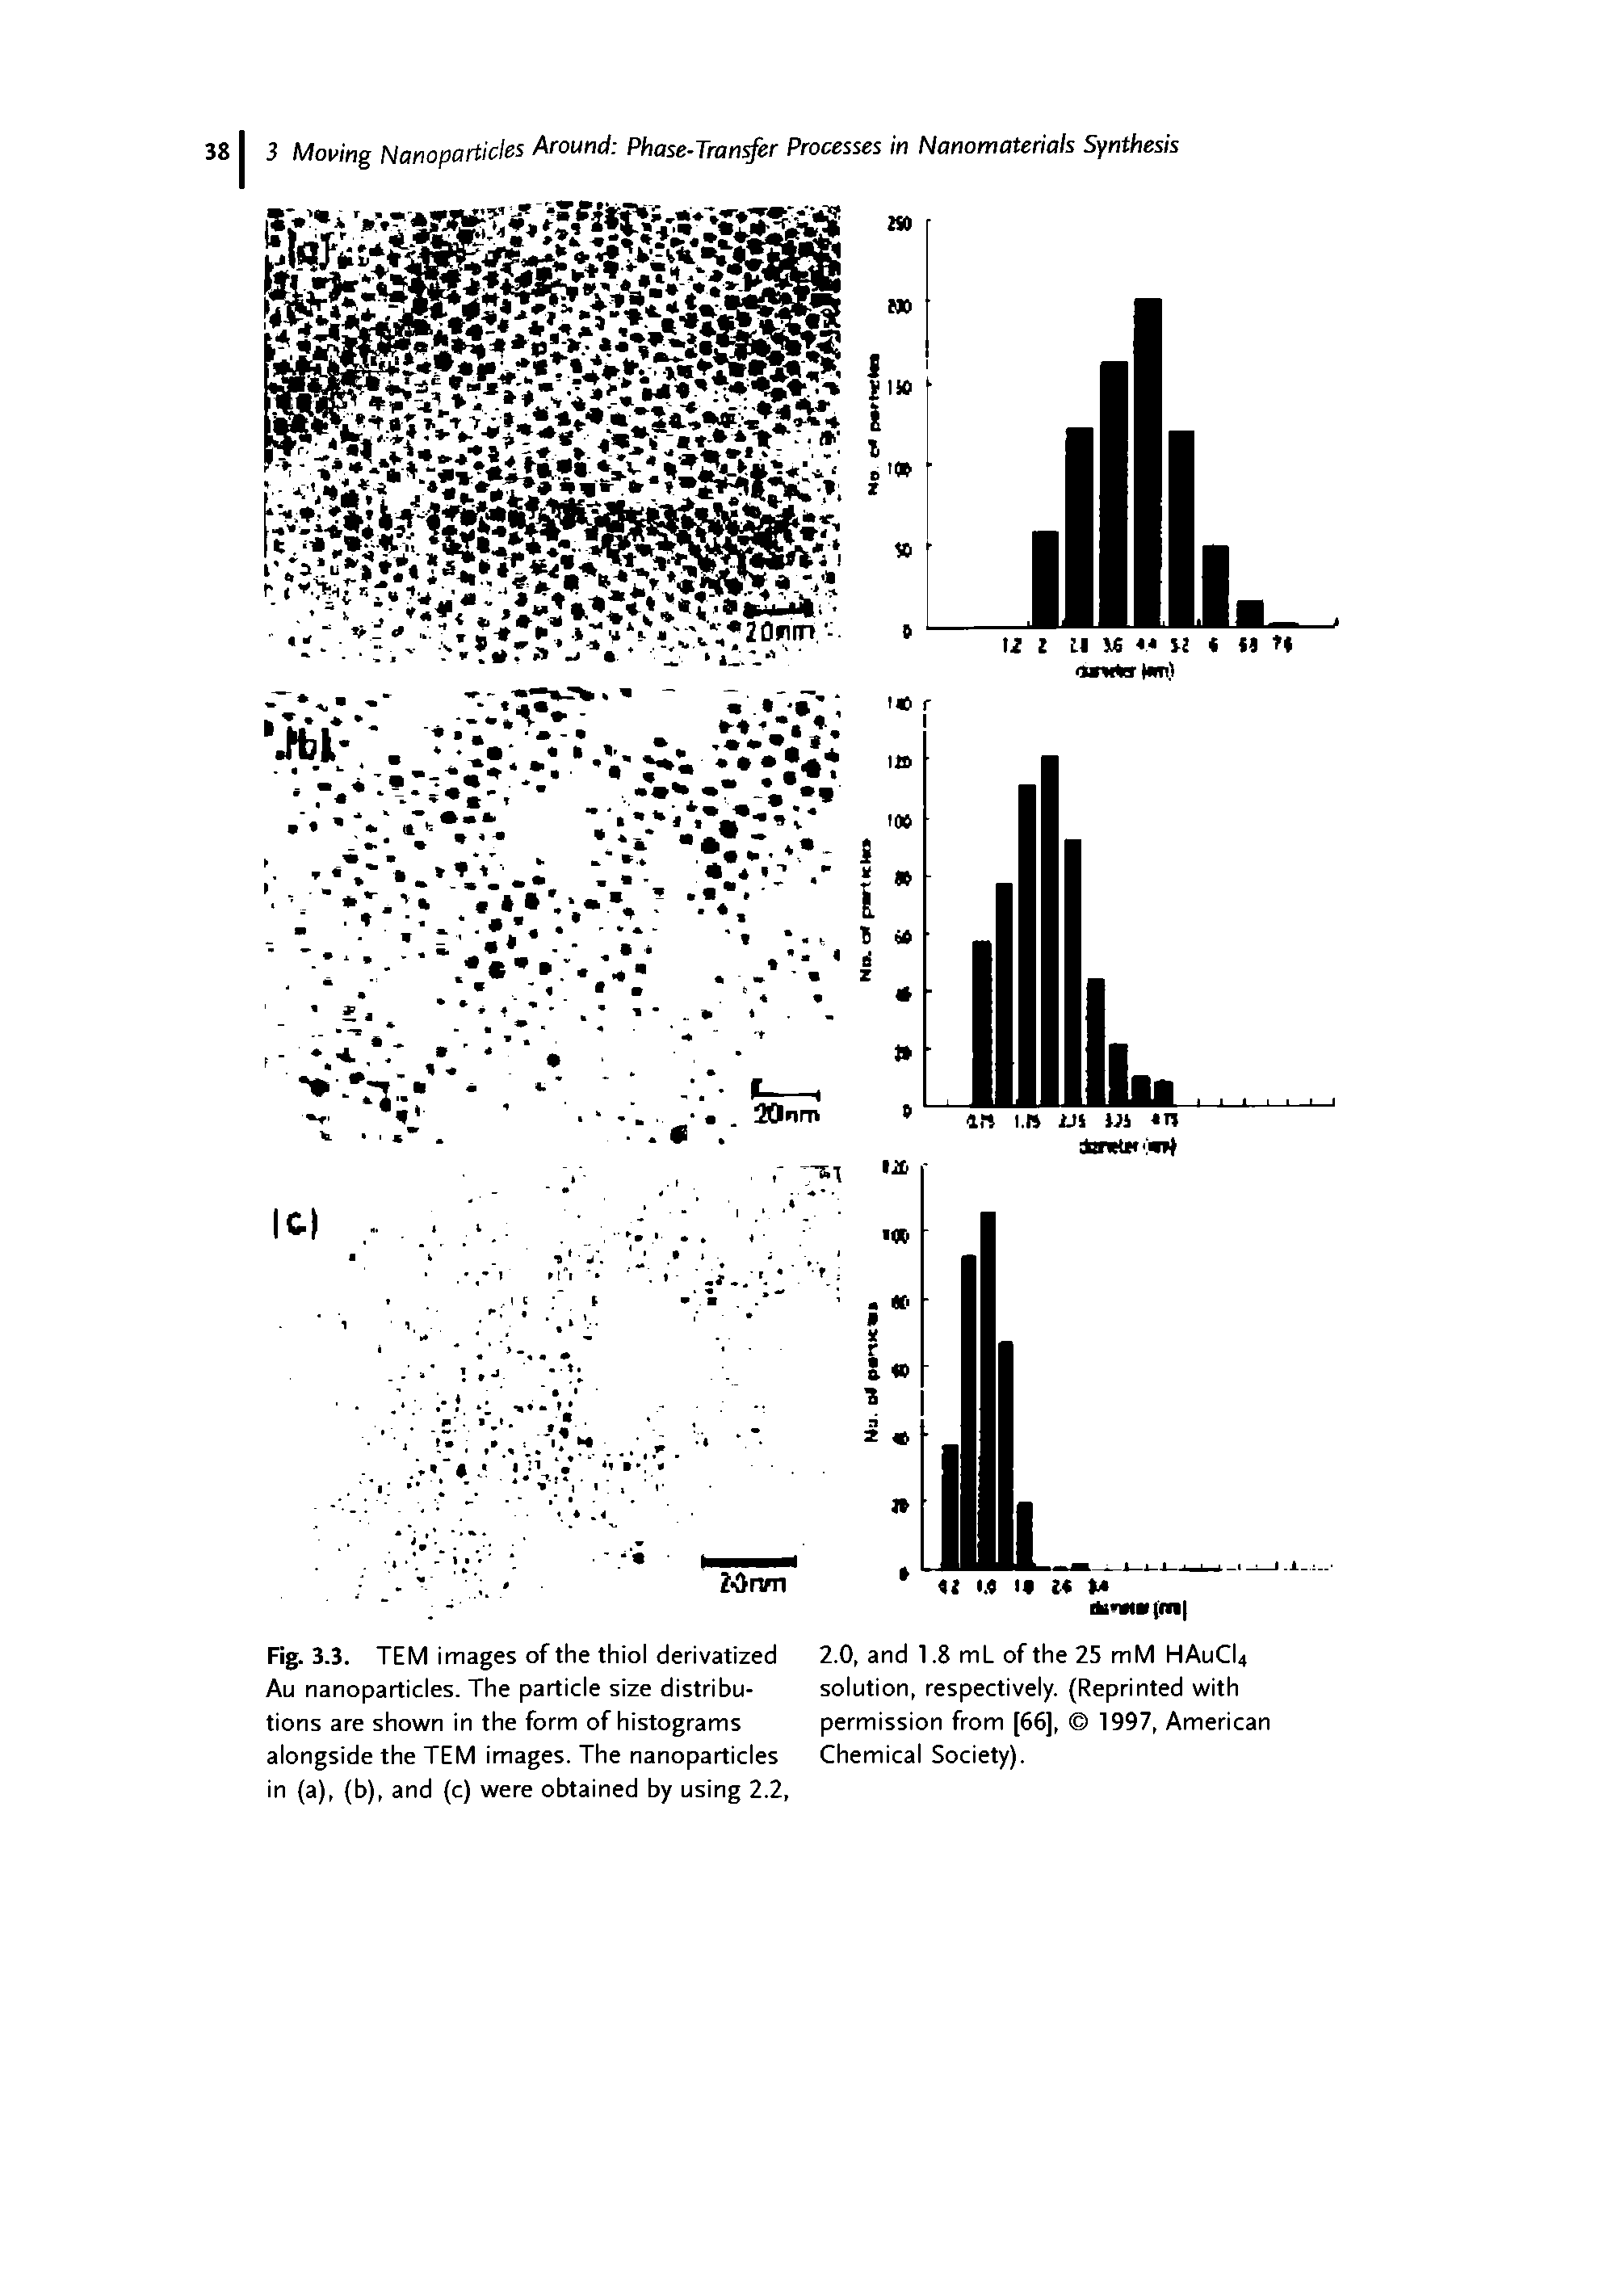 Fig. 3.3. TEM images of the thiol derivatized Au nanoparticles. The particle size distributions are shown in the form of histograms alongside the TEM images. The nanoparticles in (a), (b), and (c) were obtained by using 2.2,...